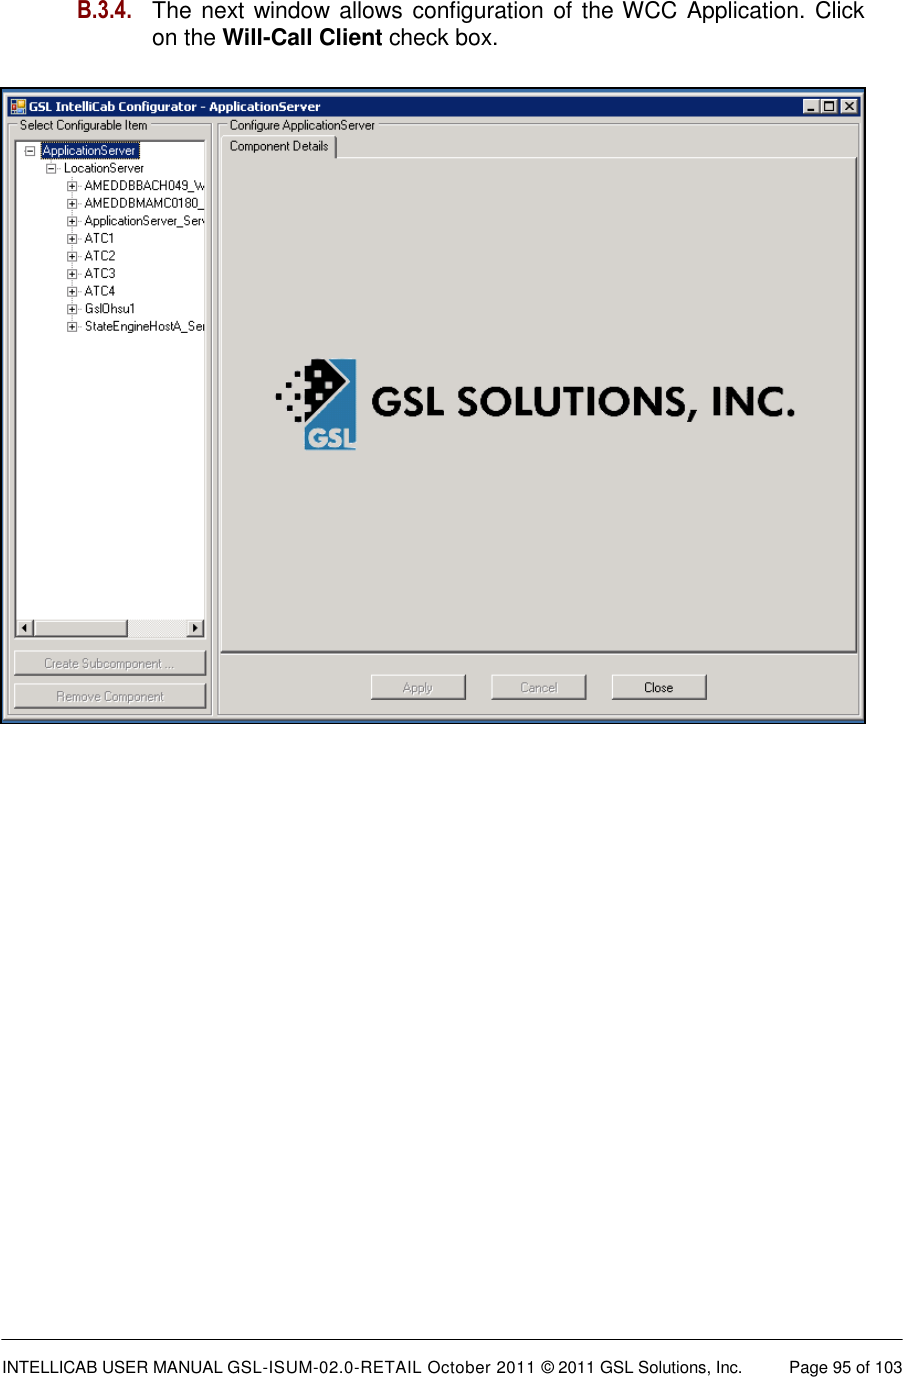  INTELLICAB USER MANUAL GSL-ISUM-02.0-RETAIL October 2011 © 2011 GSL Solutions, Inc.   Page 95 of 103    B.3.4. The next window allows configuration of the WCC Application. Click on the Will-Call Client check box. 